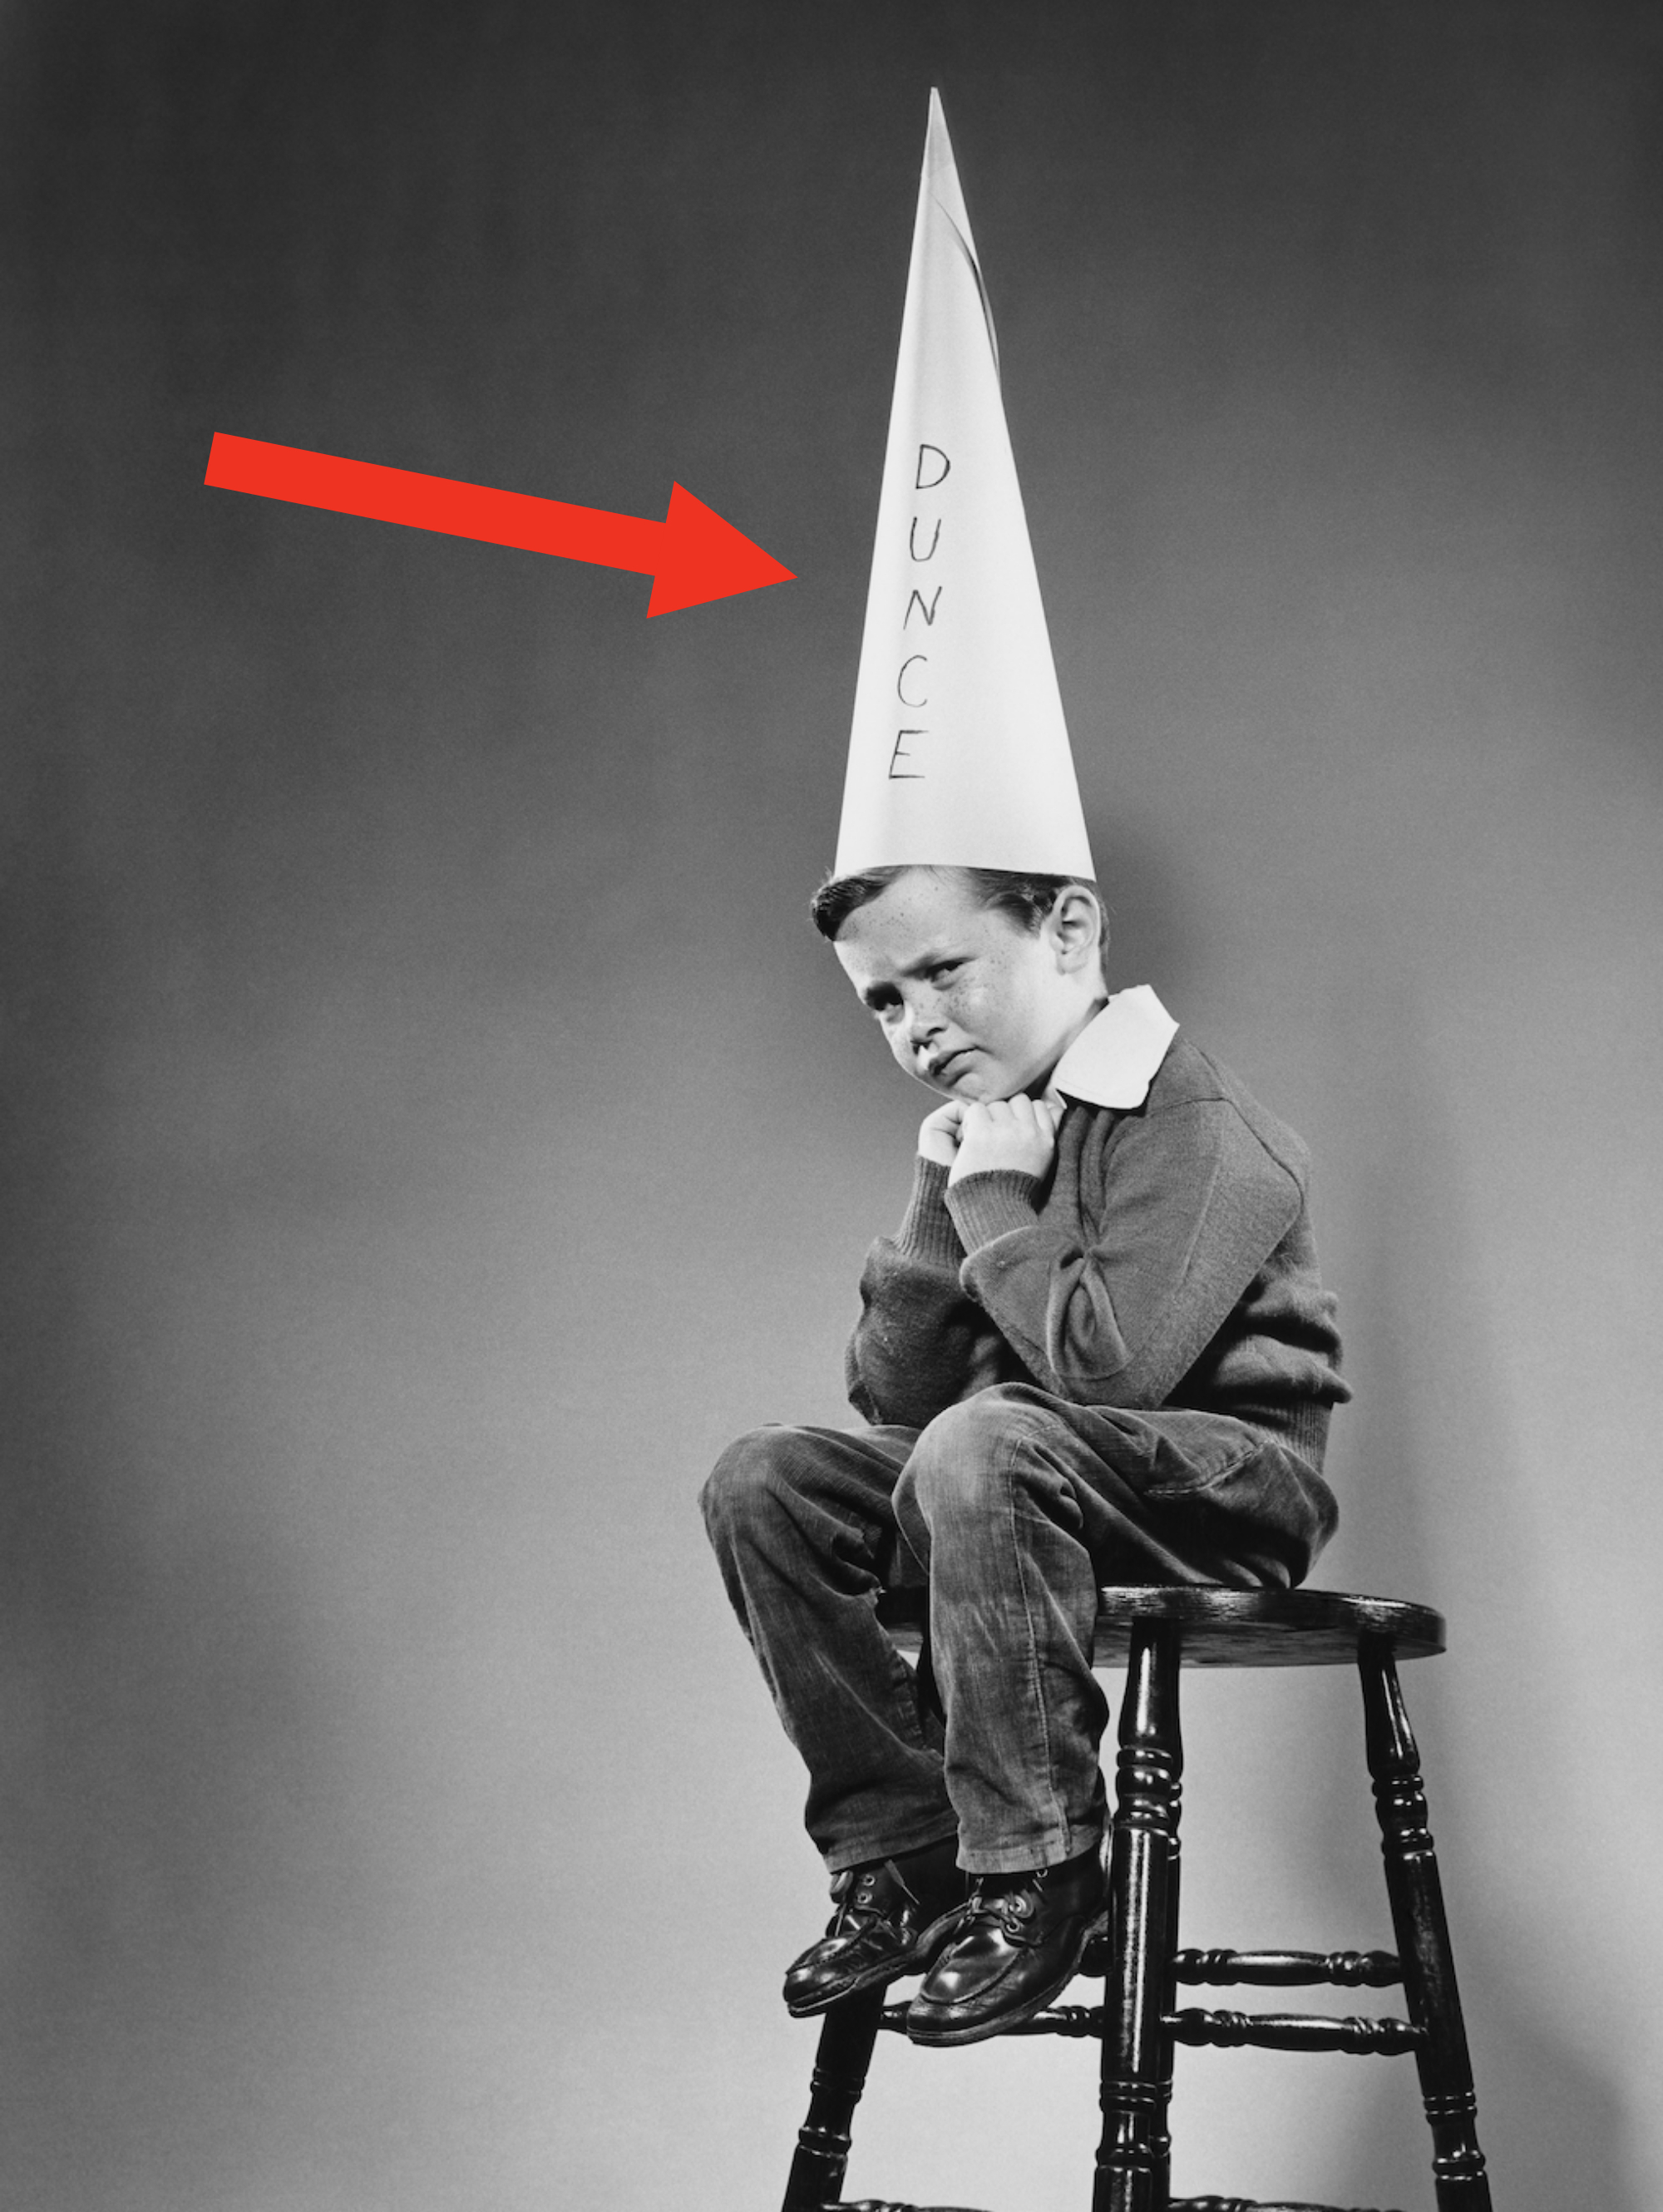 Young boy sitting on a stool wearing a dunce cap